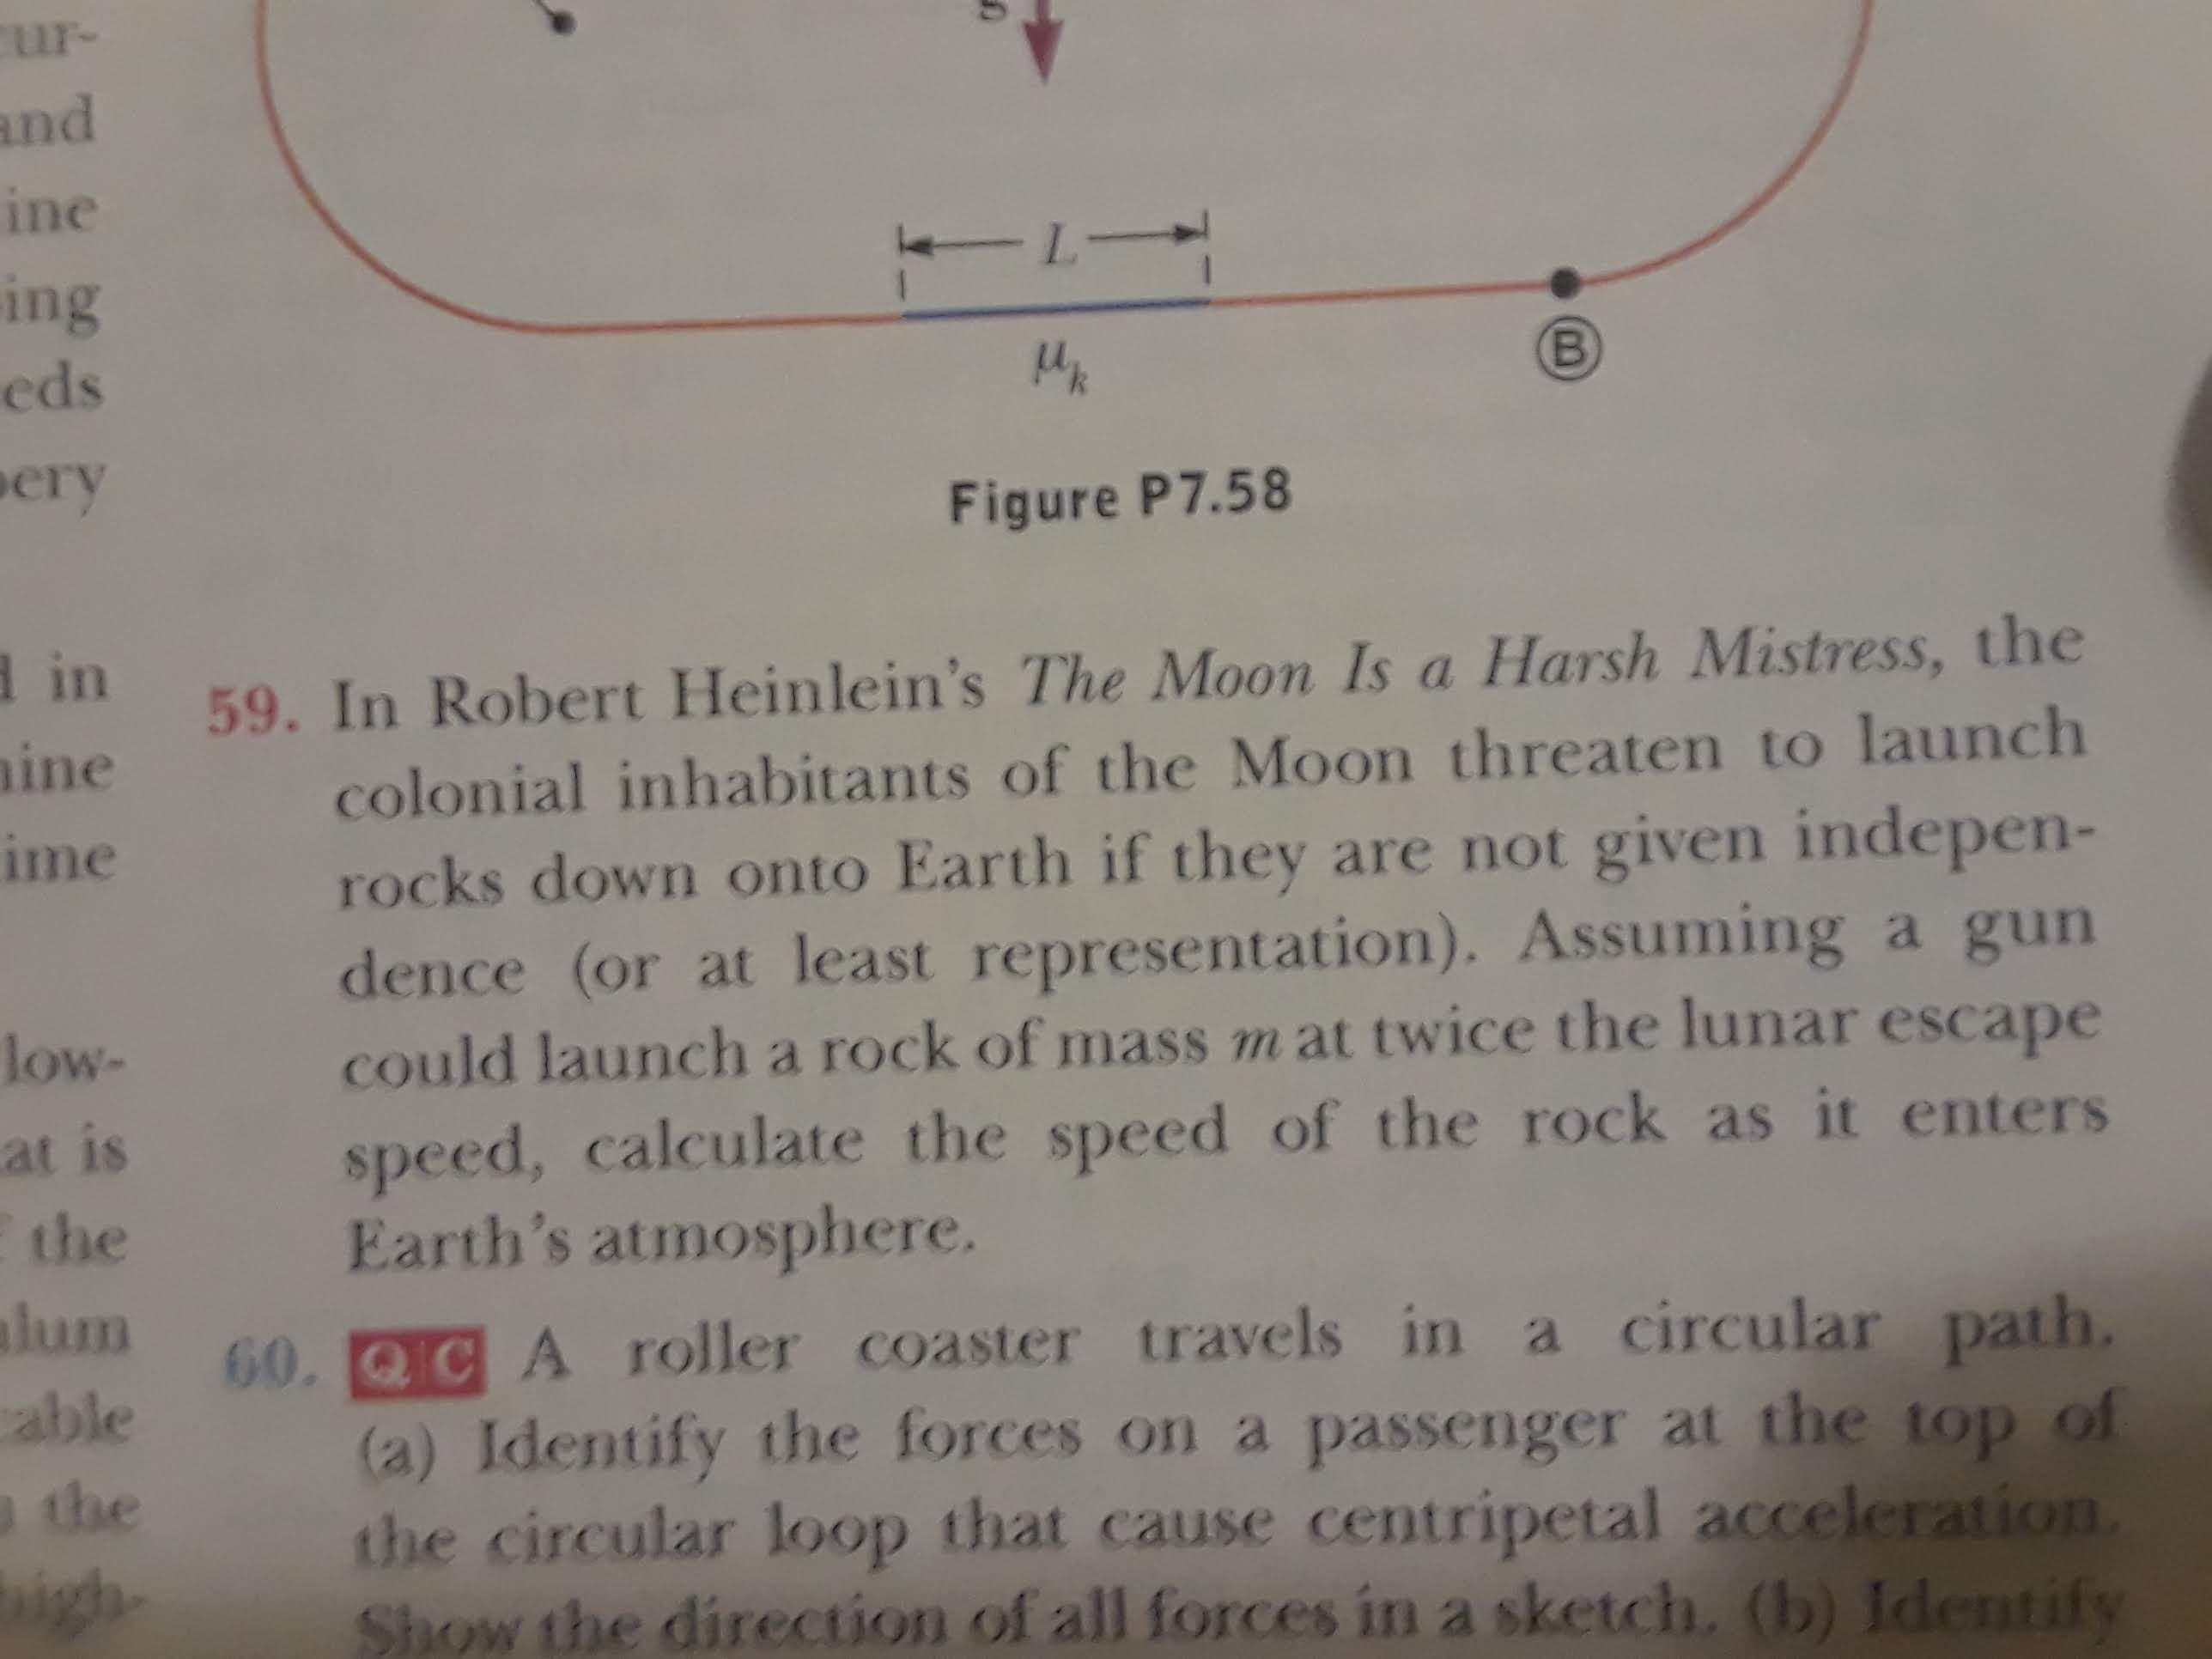 ur-
and
ine
-L-
ing
eds
В
ery
Figure P7.58
din
59. In Robert Heinlein's The Moon Is a Harsh Mistress, the
ine
colonial inhabitants of the Moon threaten to launch
ime
rocks down onto Earth if they are not given indepen-
dence (or at least representation). Assuming a gun
could launcha rock of mass m at twice the lunar escape
speed, calculate the speed of the rock as it enters
Earth's atmosphere.
60.C A roller coaster travels in a circular path.
(a) Identify the forces on a passenger at the top of
the circular loop that cause centripetal acceleration.
Show the direction of all forces in a sketch. (b) Identify
low-
at is
the
alum
cable
athe
igh
B
